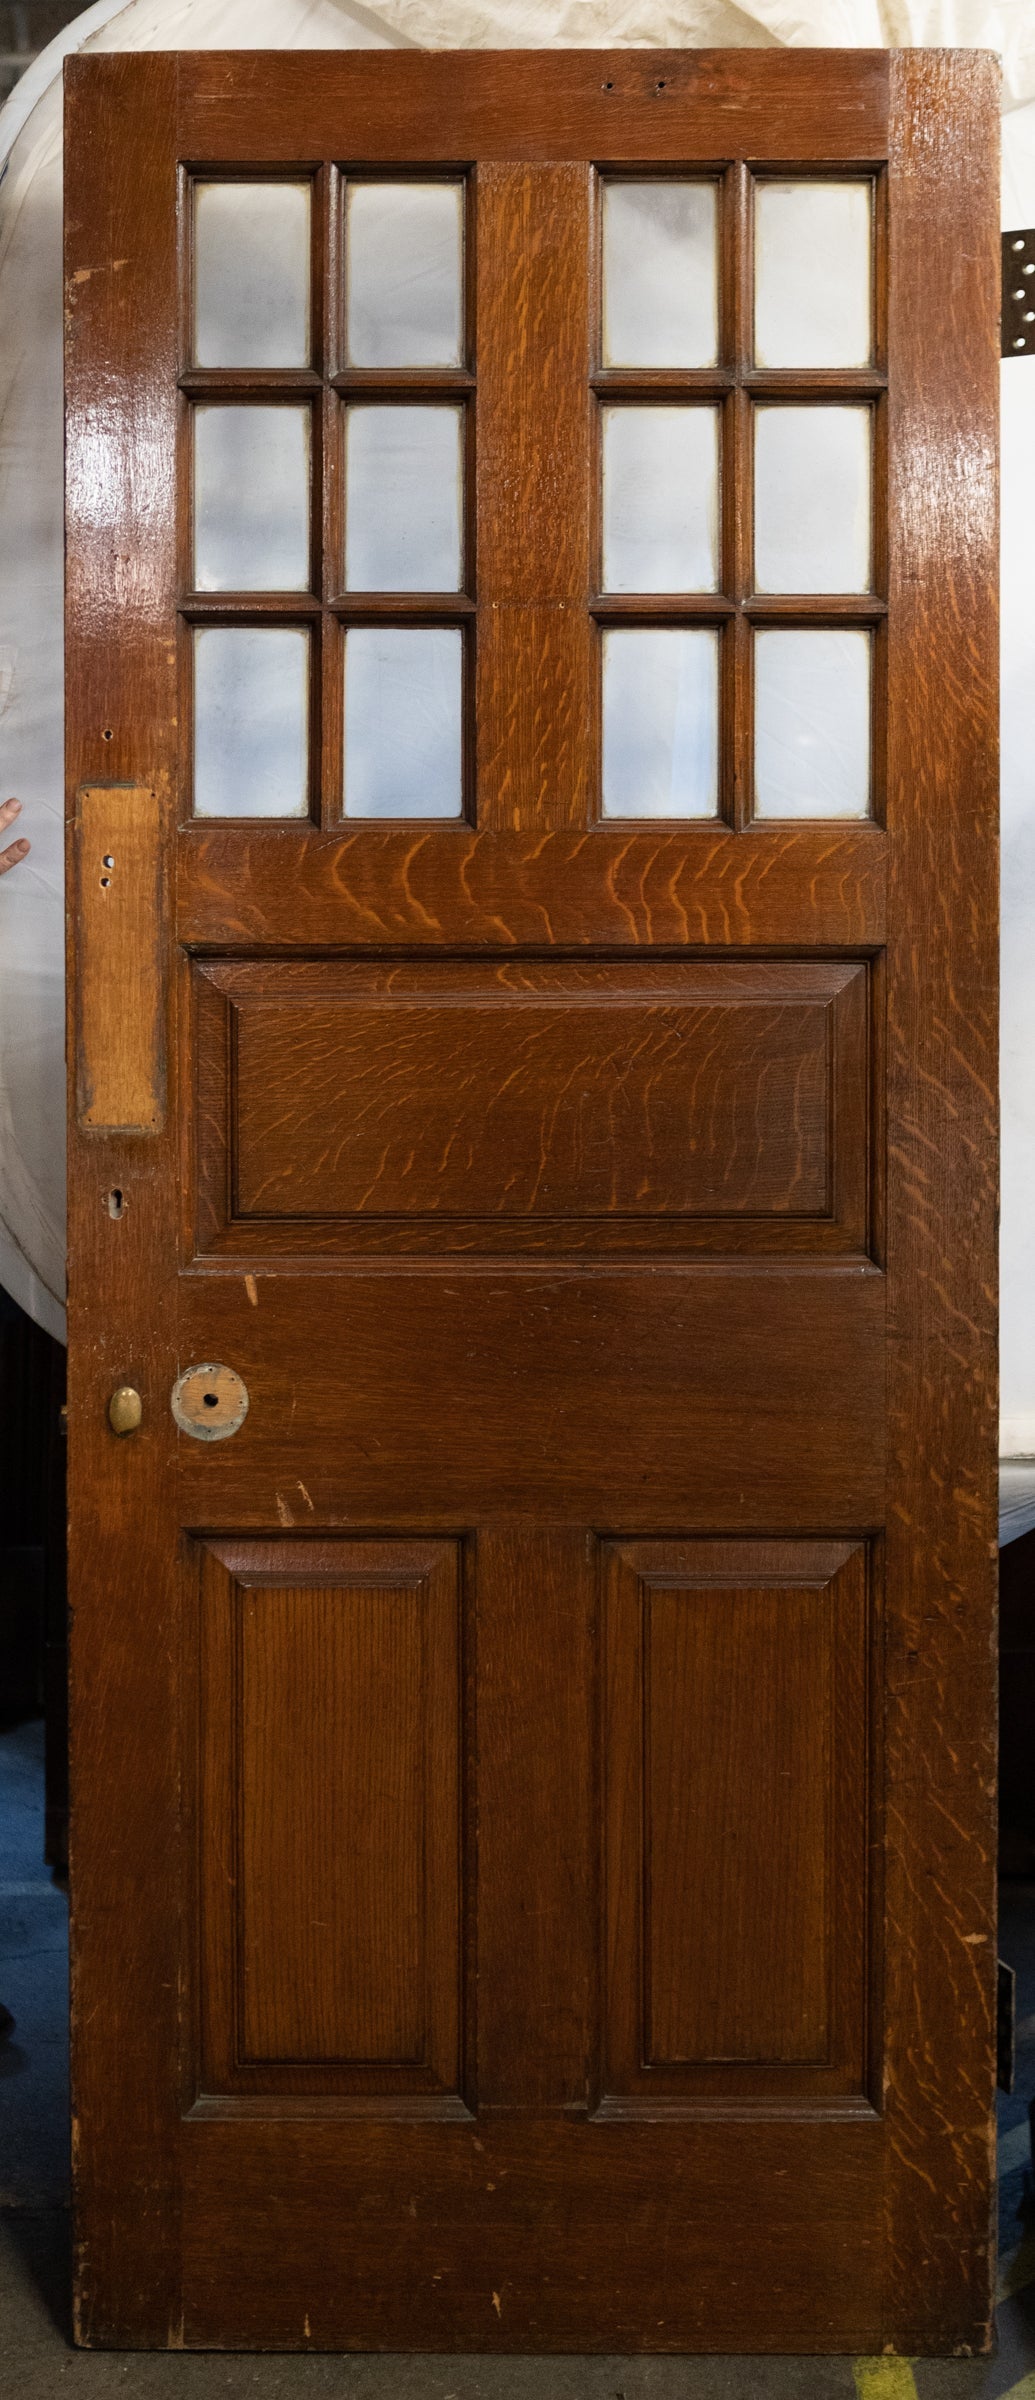 Glazed Oak Doors Reclaimed from Mercers&#39; Hall London | The Architectural Forum